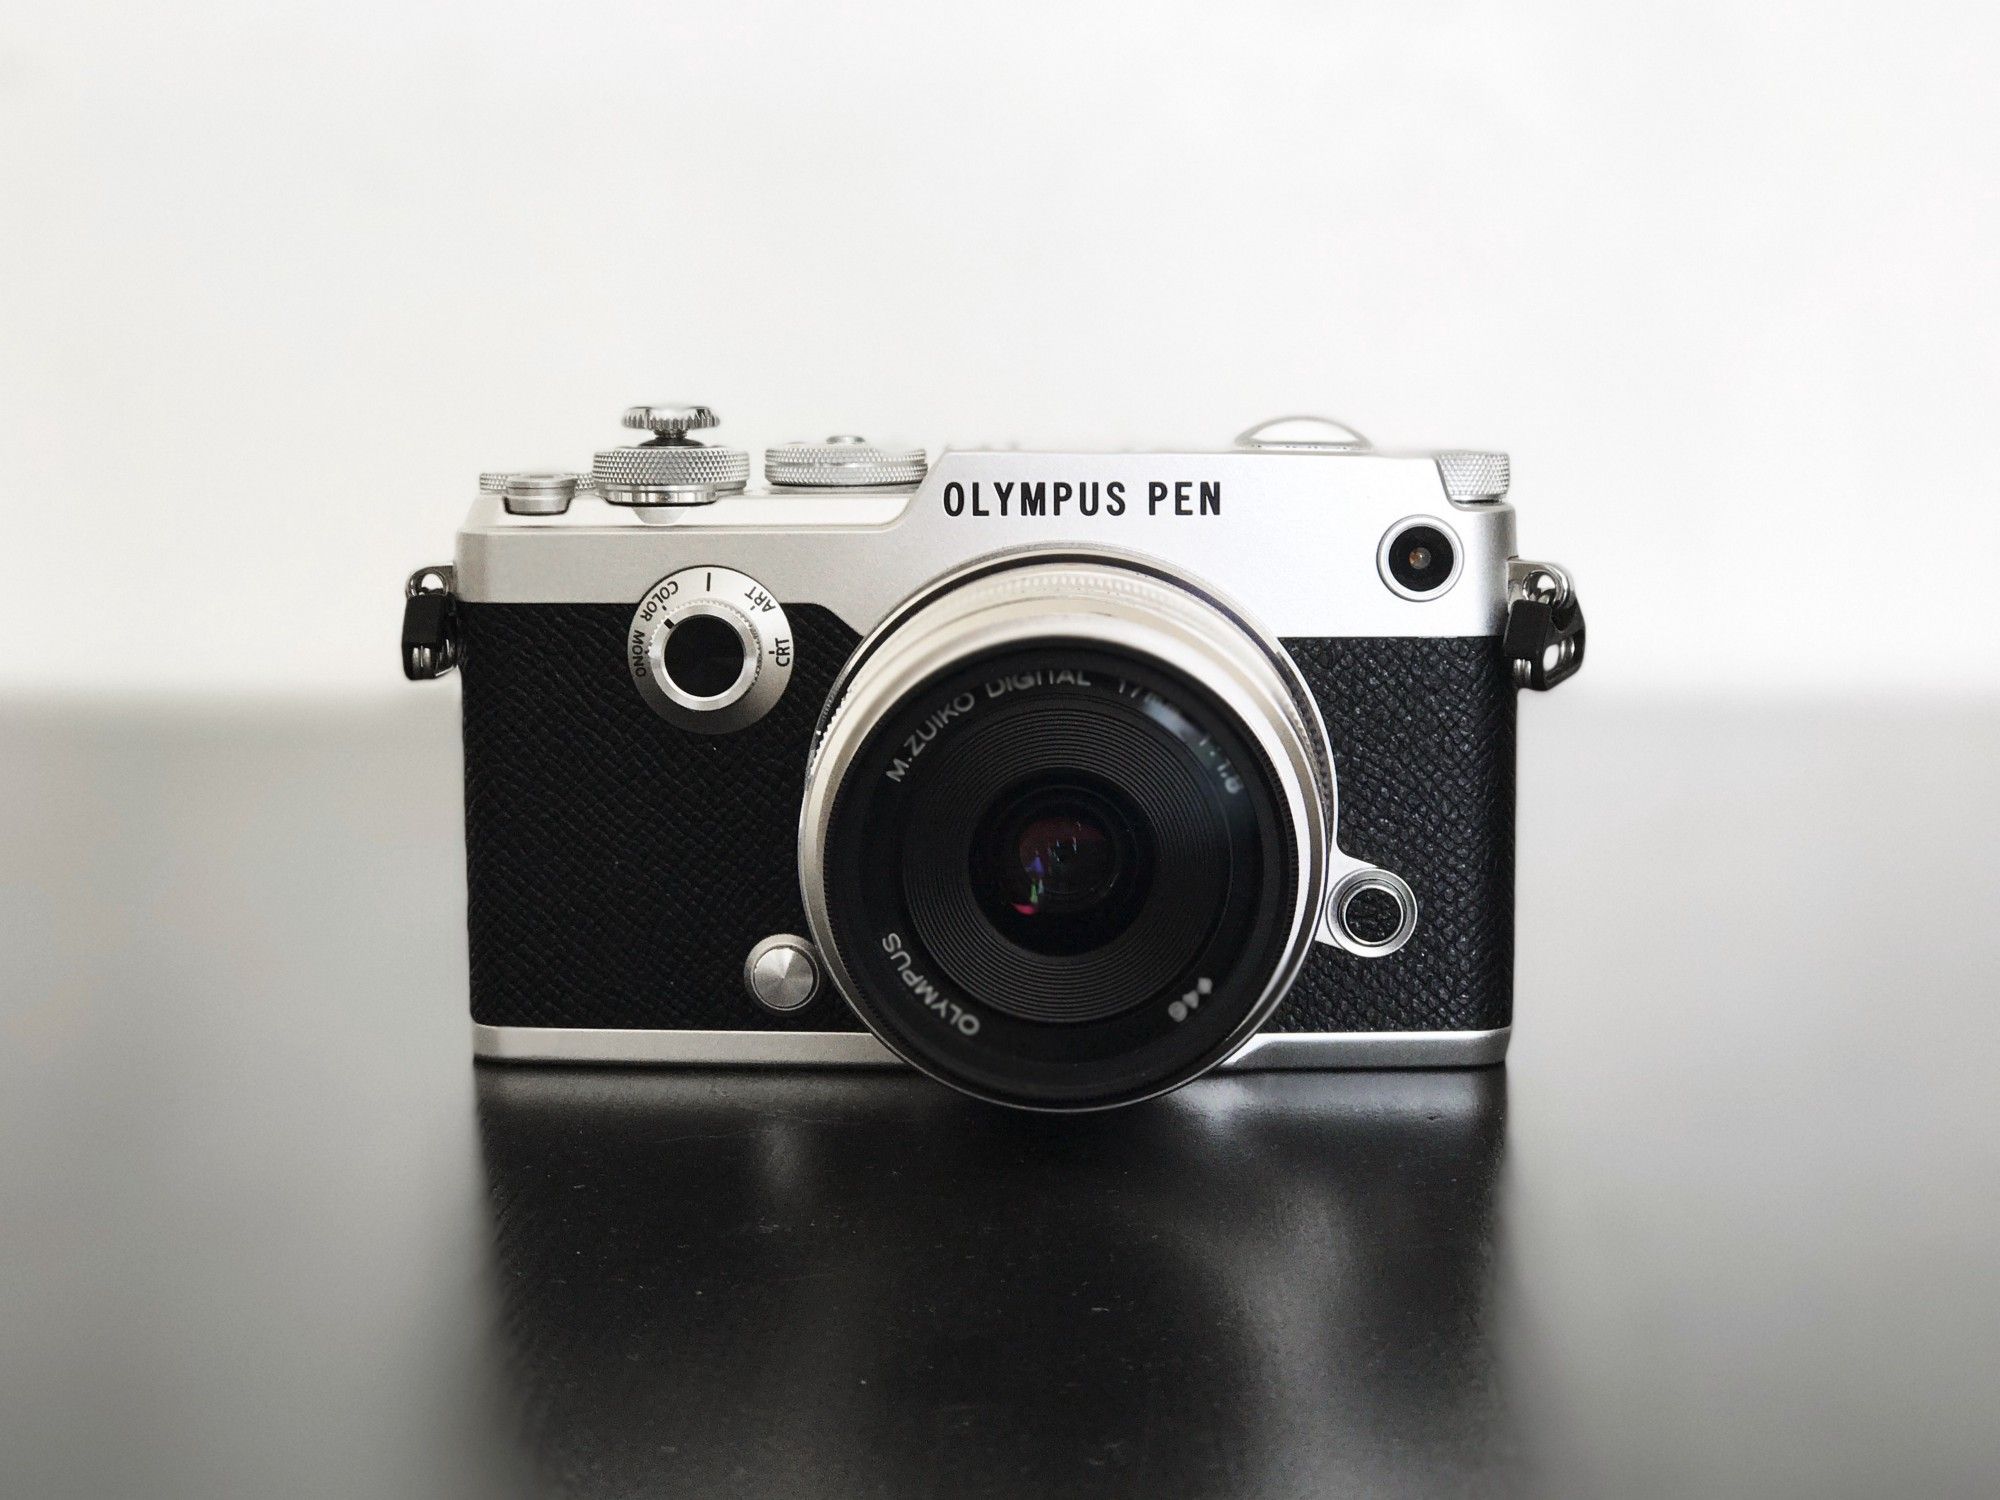 My PEN-F, with 17mm ƒ/1.8 mounted and a soft shutter release button.